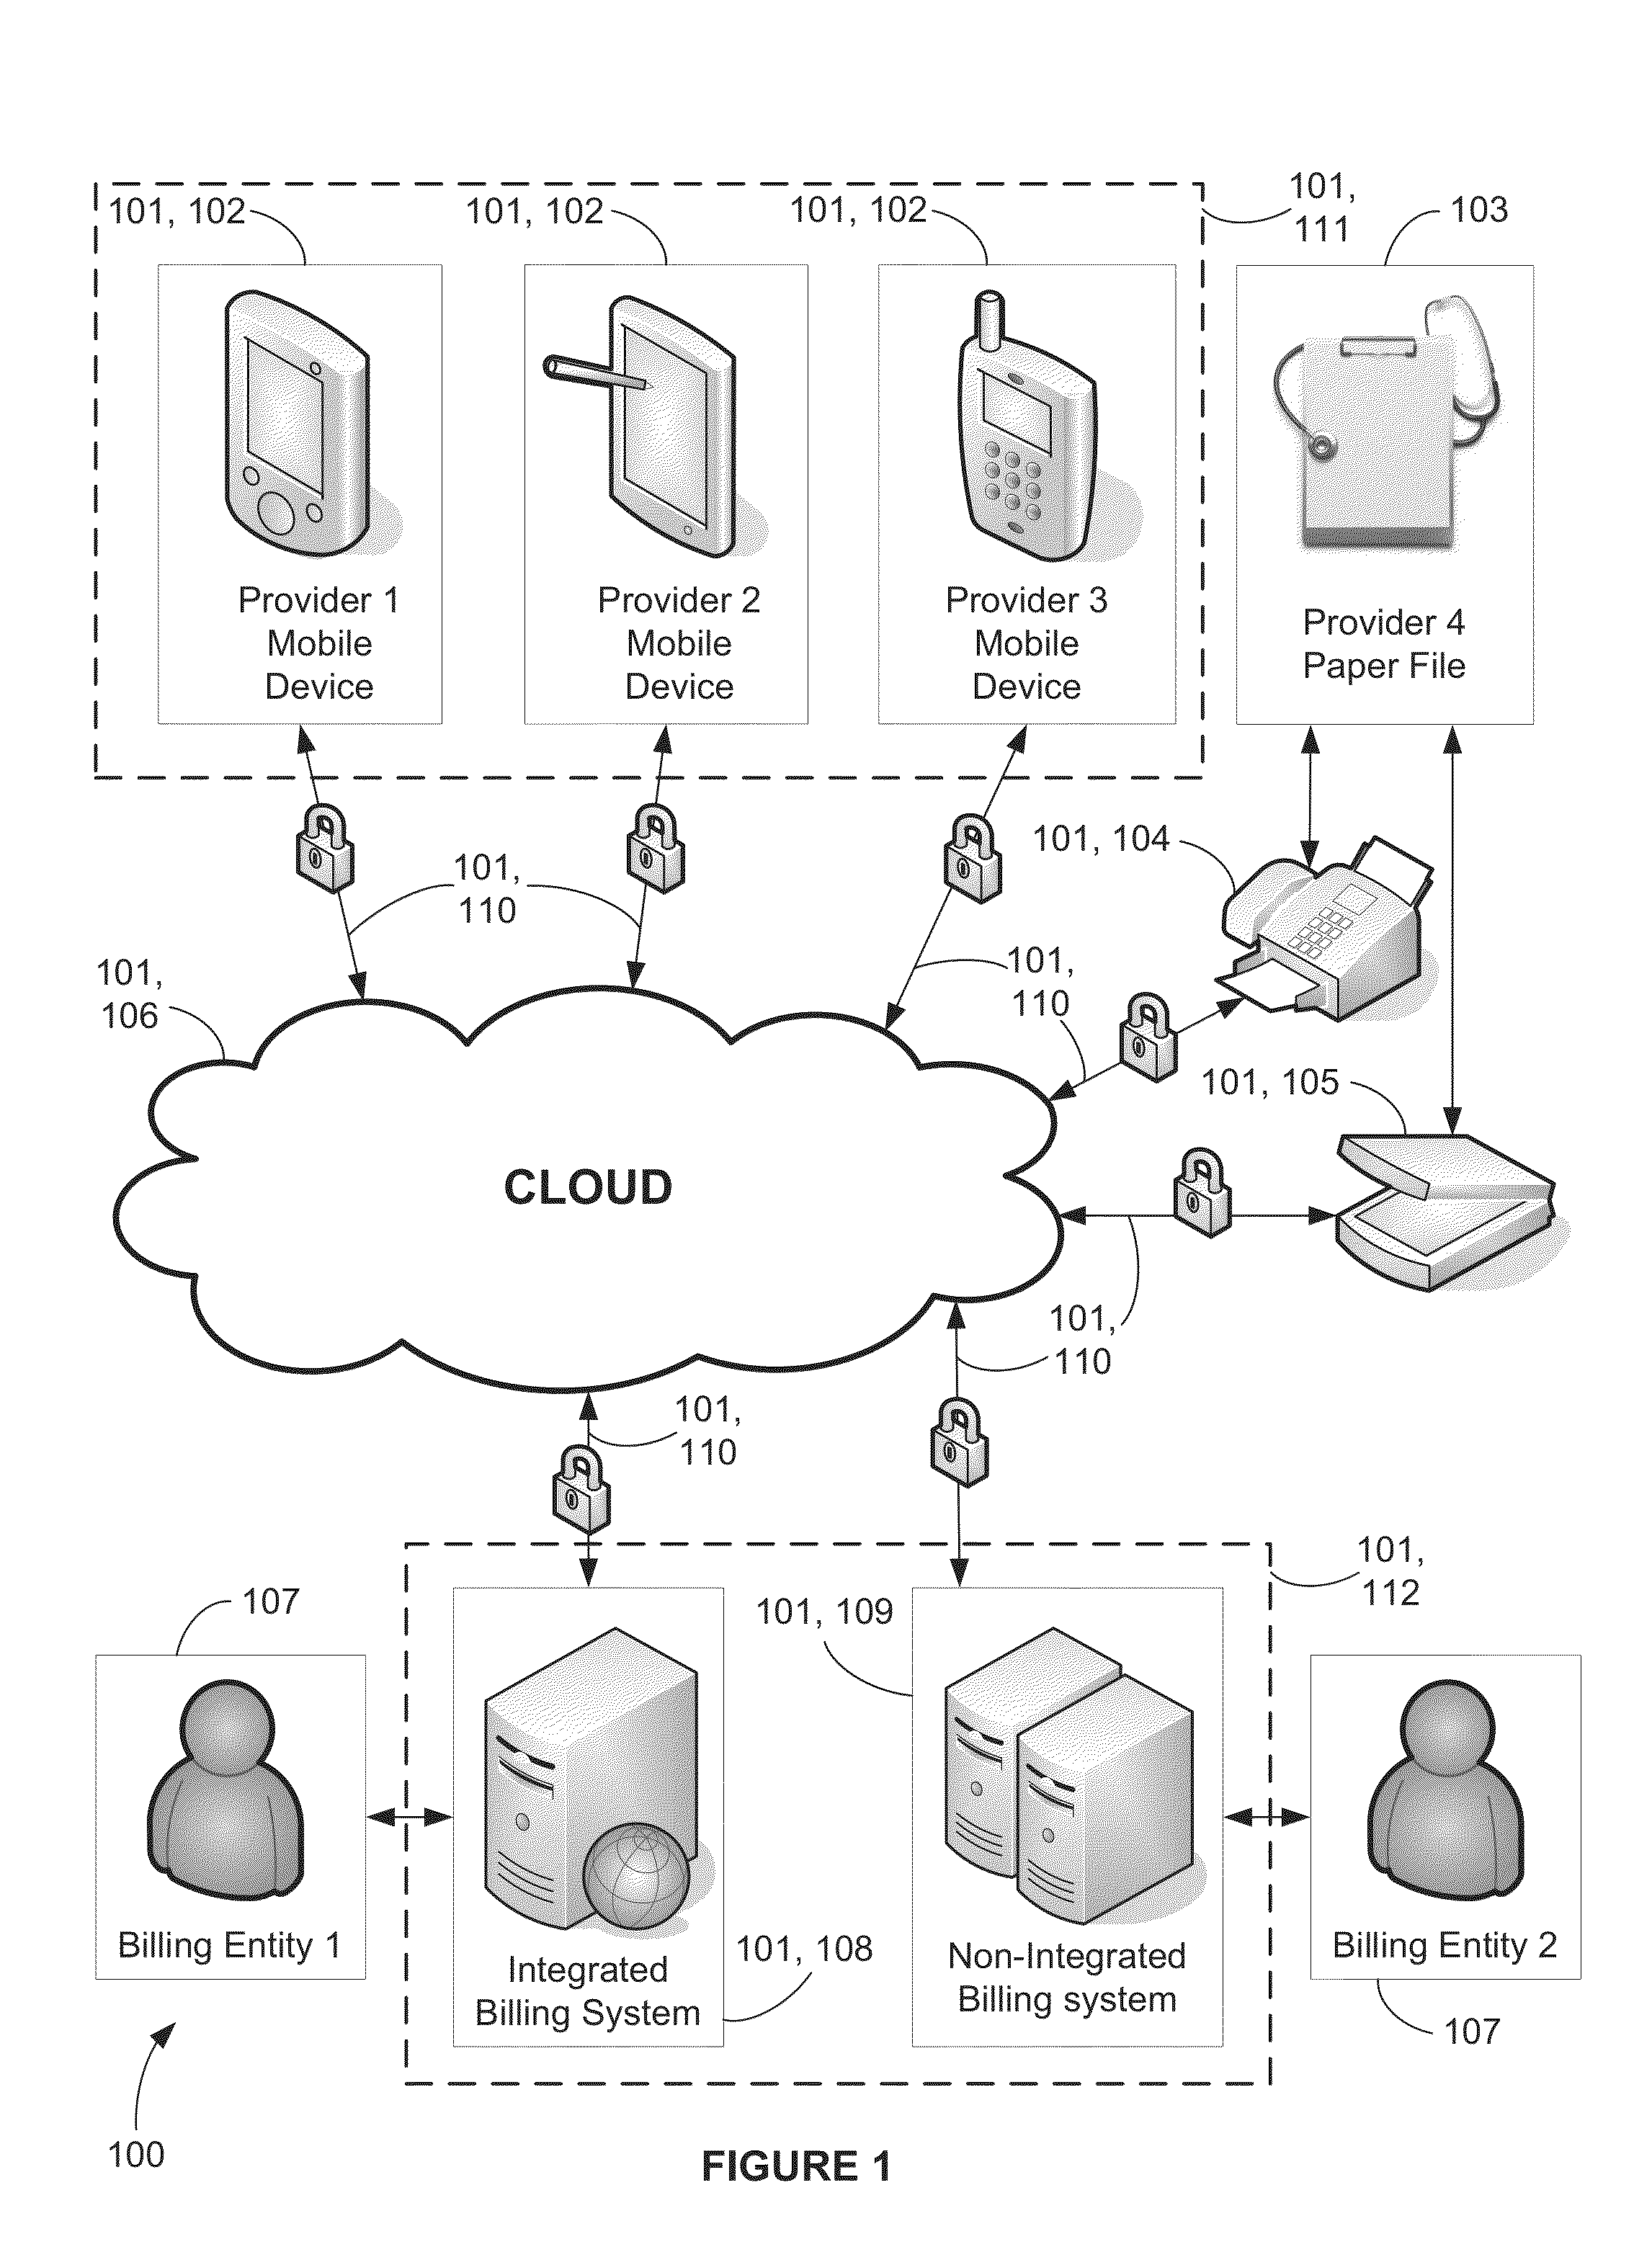 System and method for providing real-time bi-directional charge capture-centralized conversation between billing and provider entities